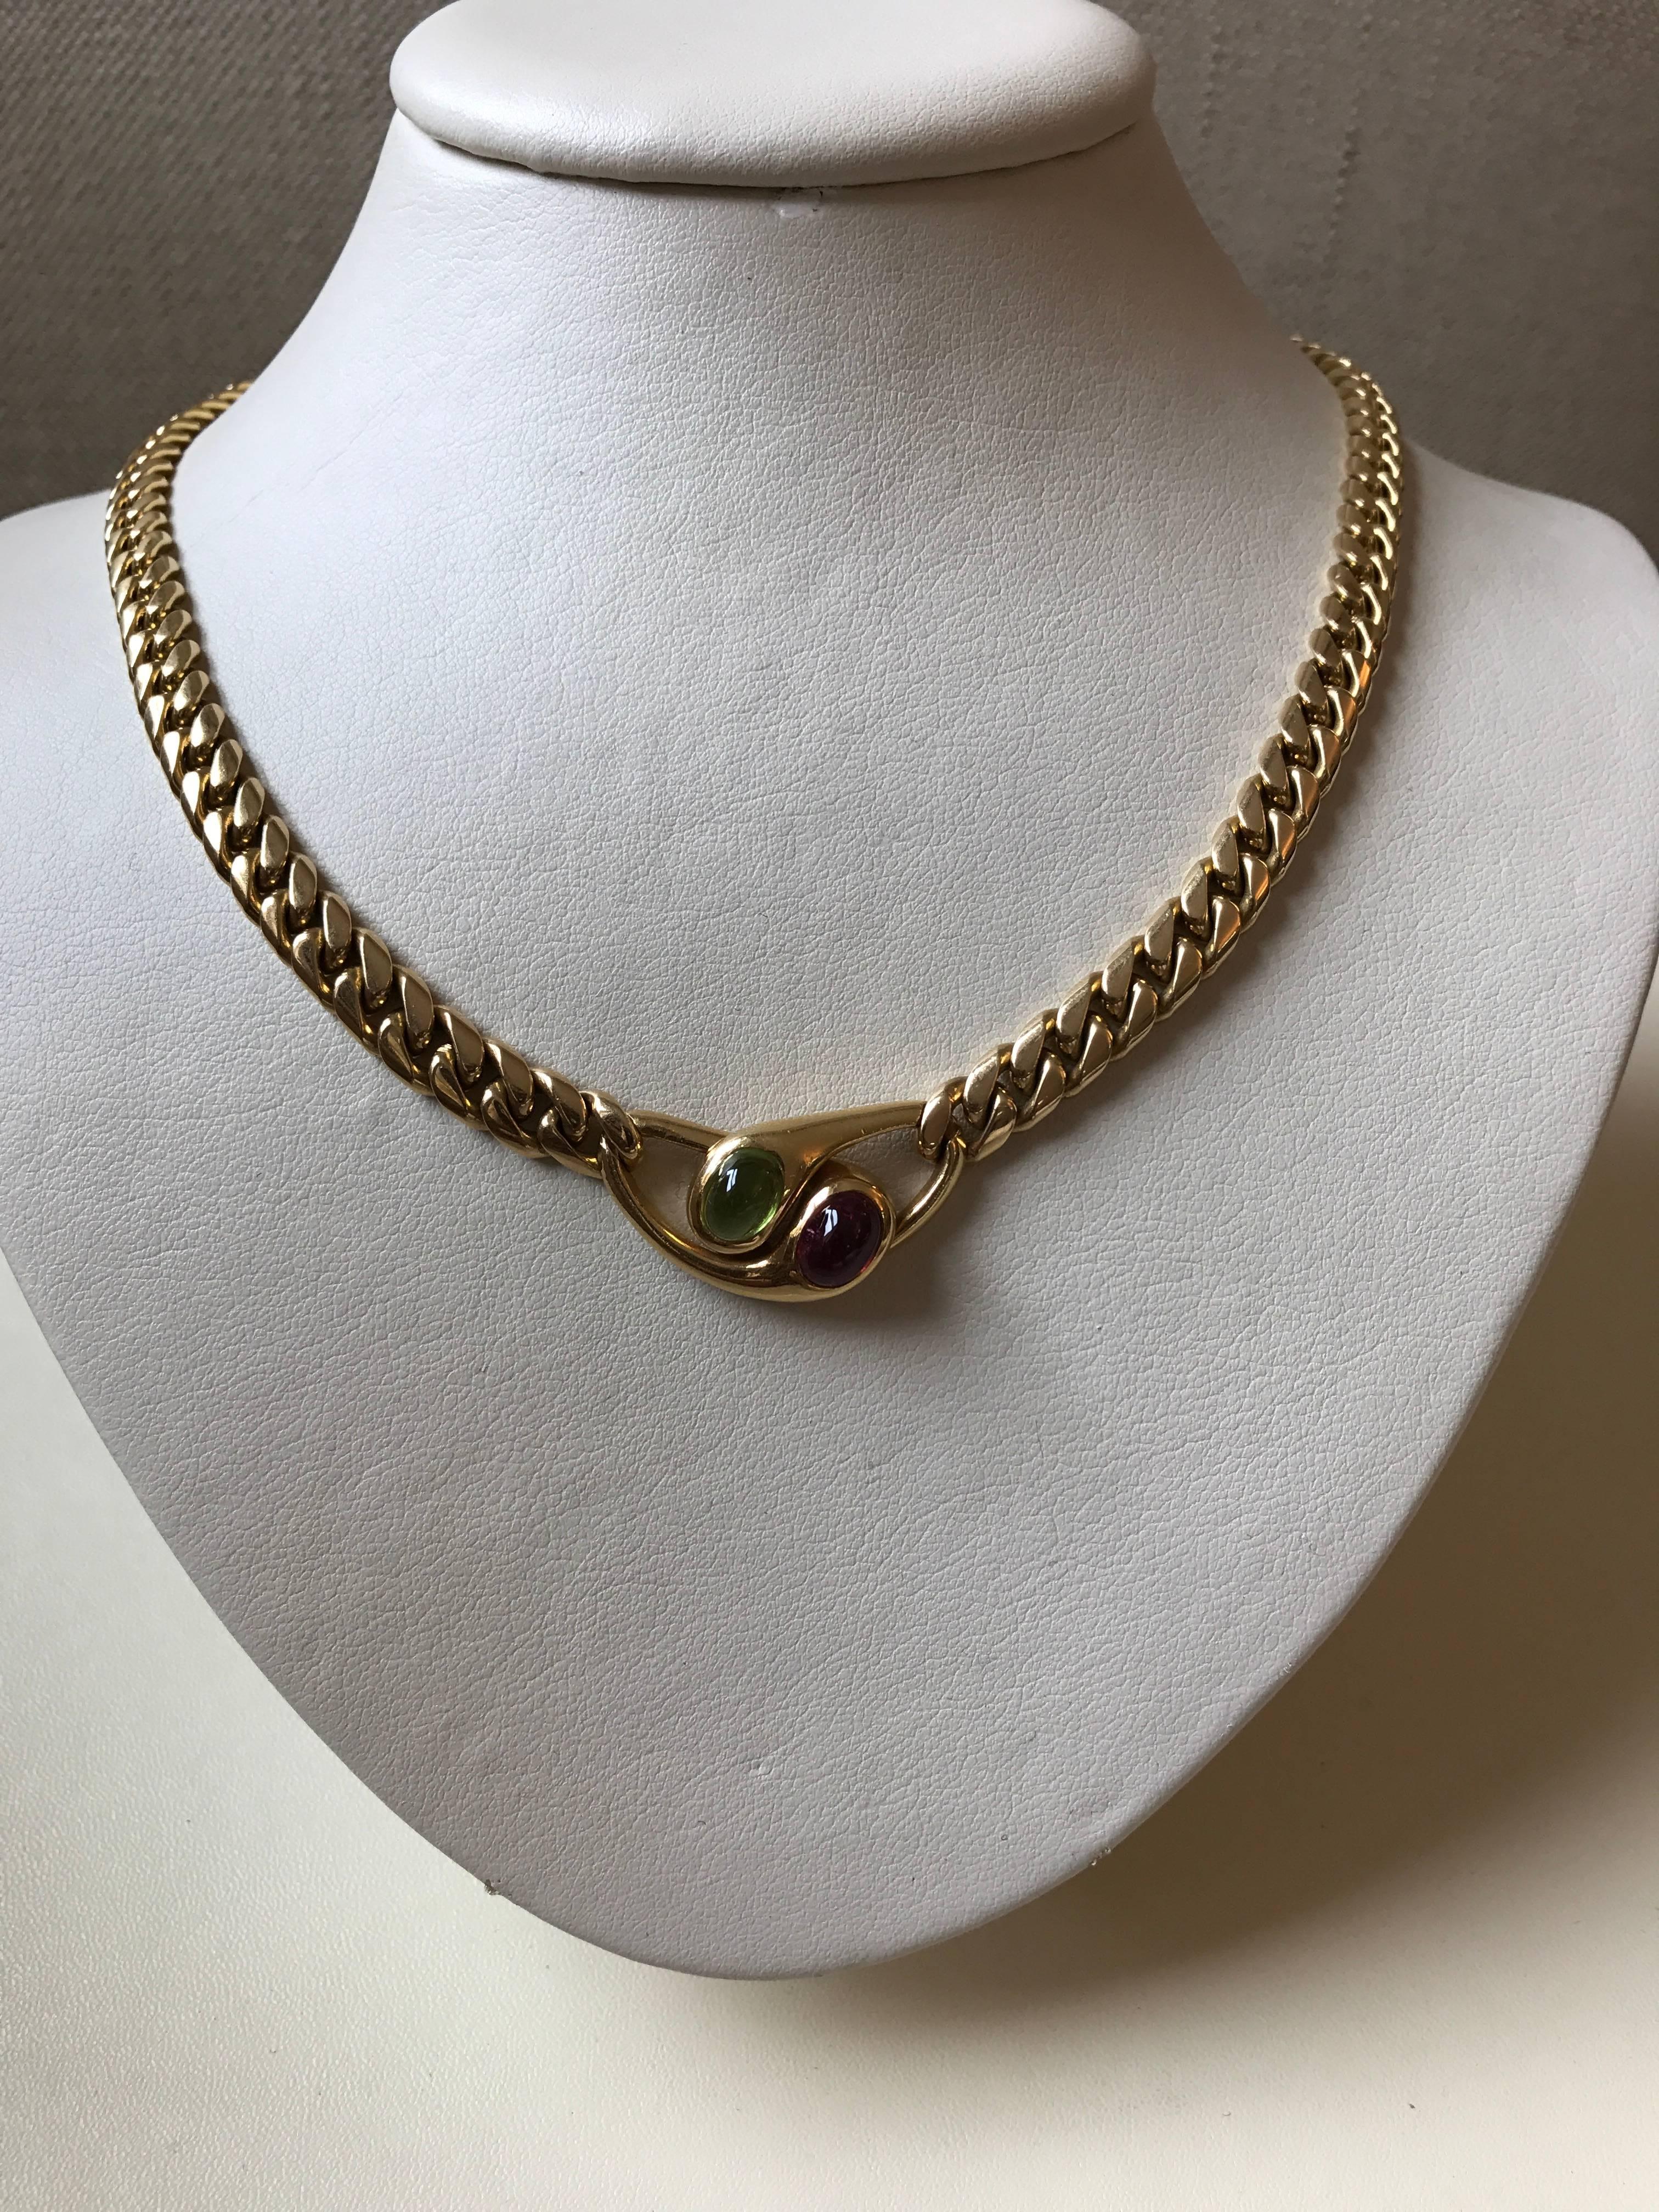 18ct yellow gold curb link necklace with central cabochon pink tourmaline and cabochon peridot feature signed by Bvlgari, circa 1990

Overall length of necklace 41cms